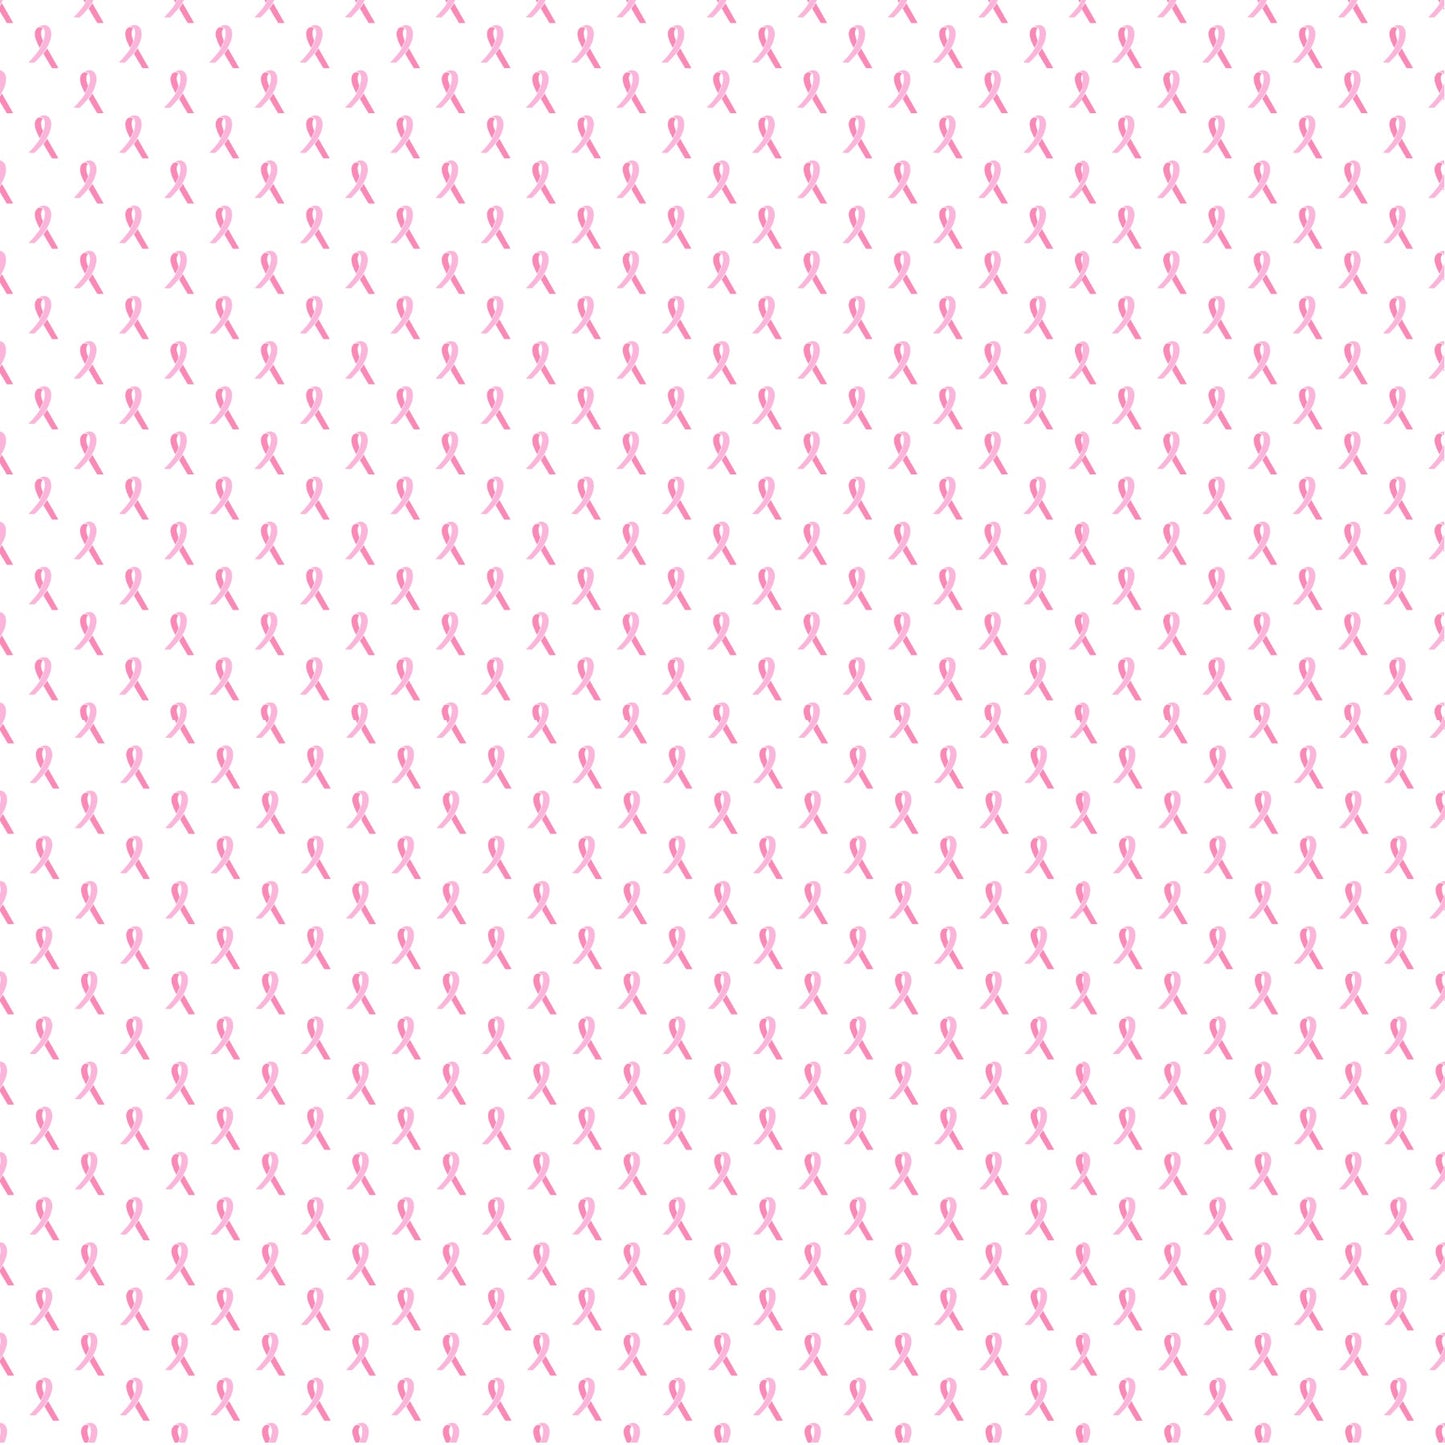 Pink On White Breast Cancer Awareness Ribbons - Adhesive Vinyl